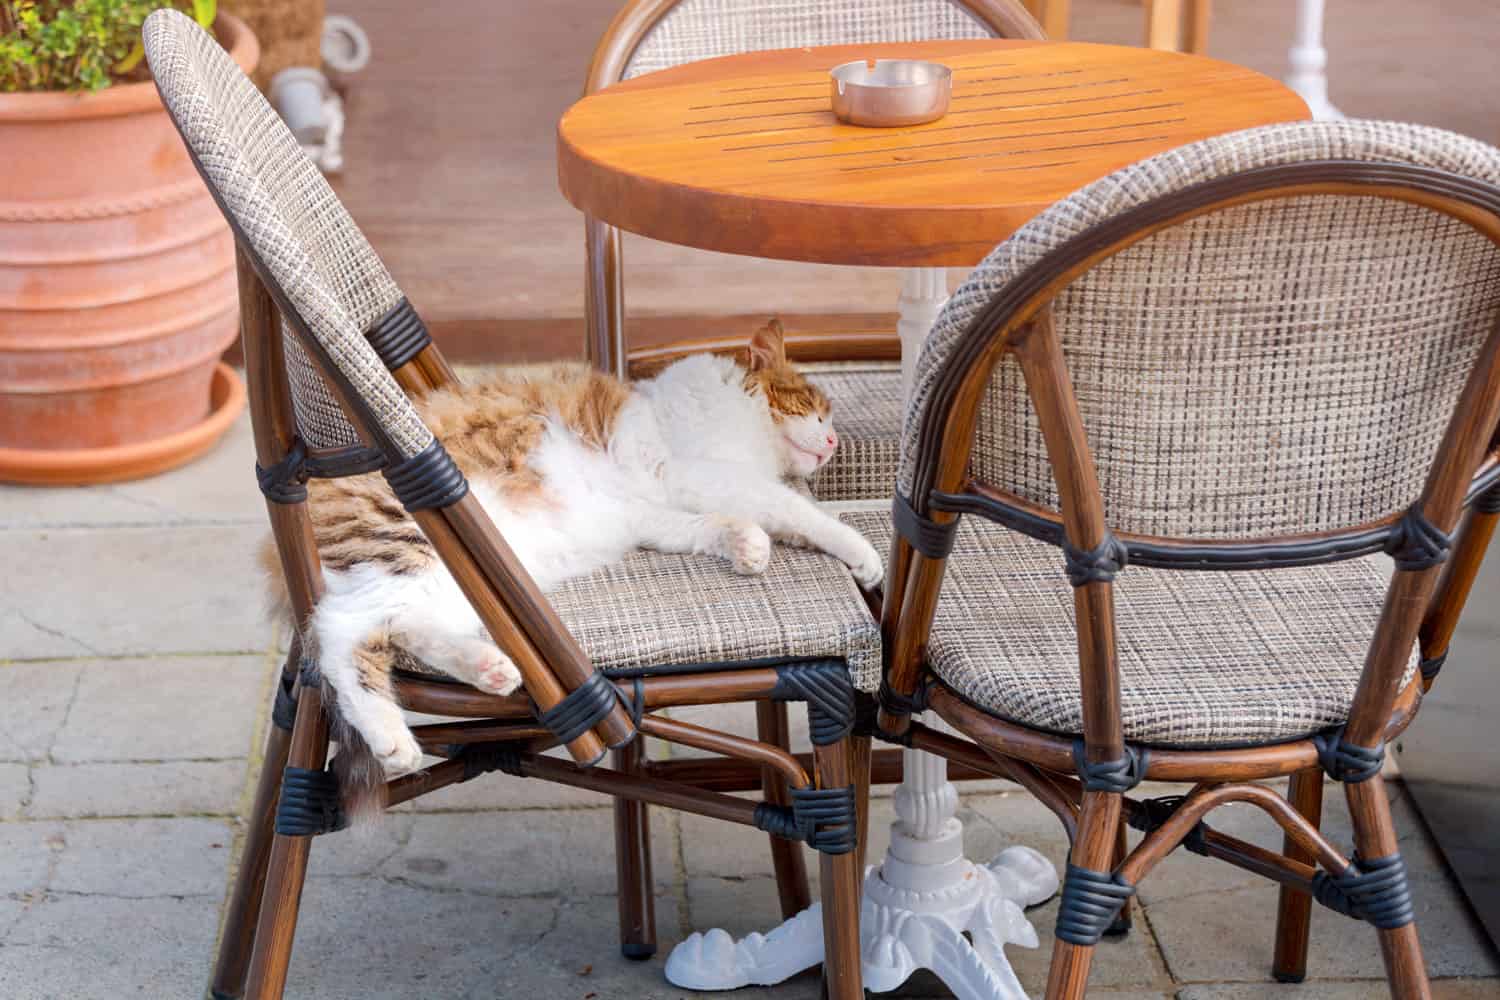 n adorable feral cat is peacefully sleeping on a chair at a street restaurant.